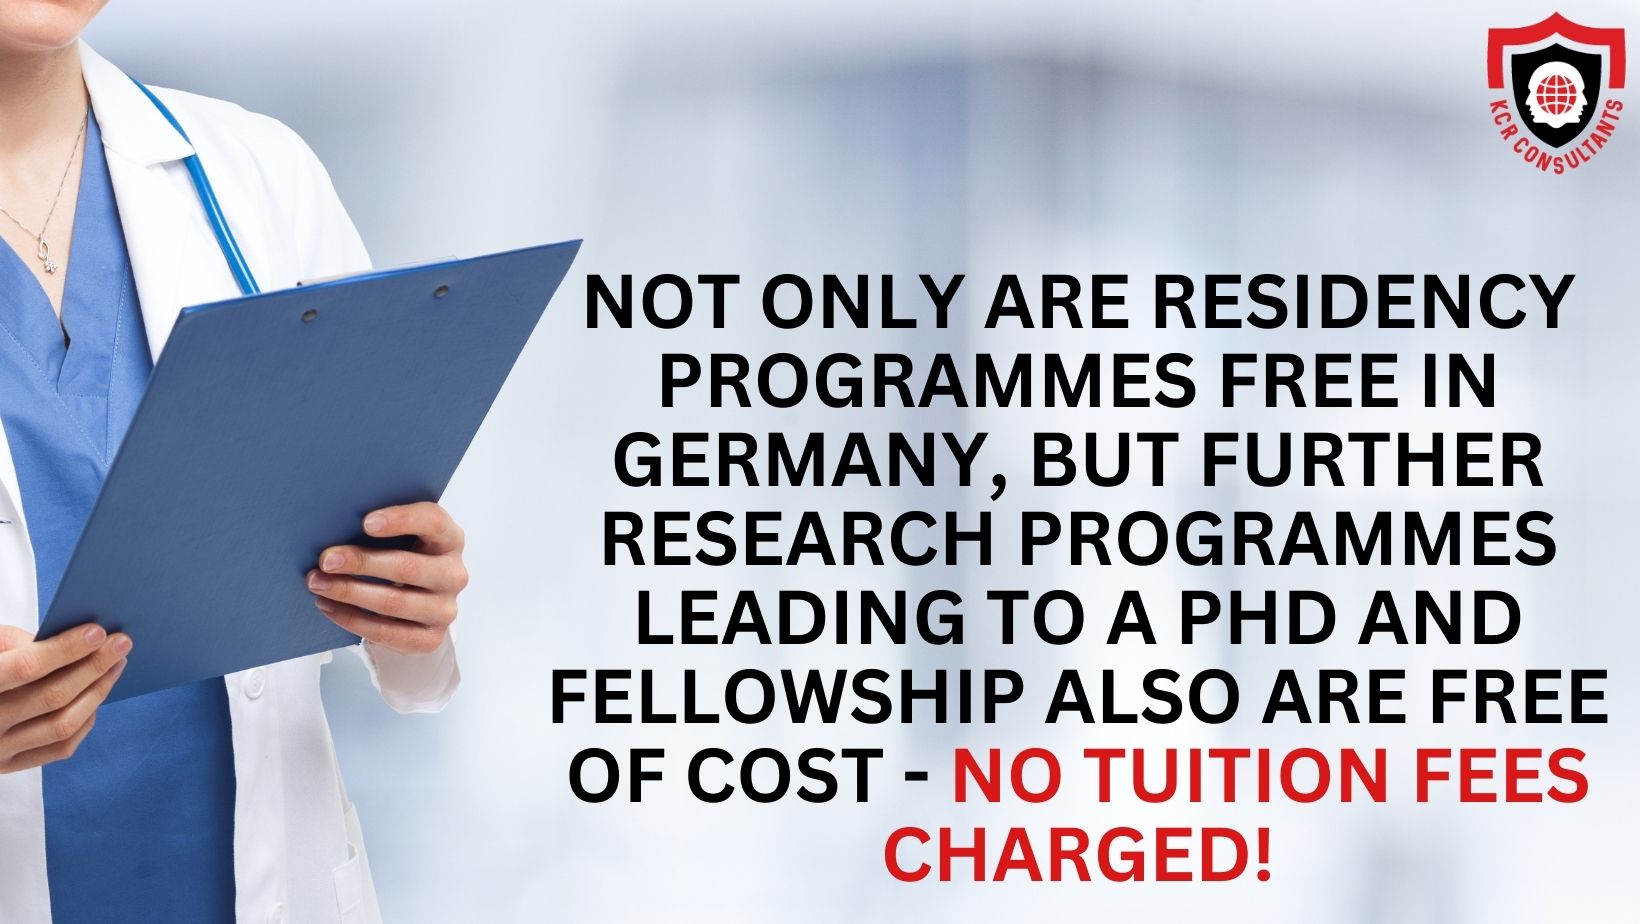 Is Medical PG Free in Germany?